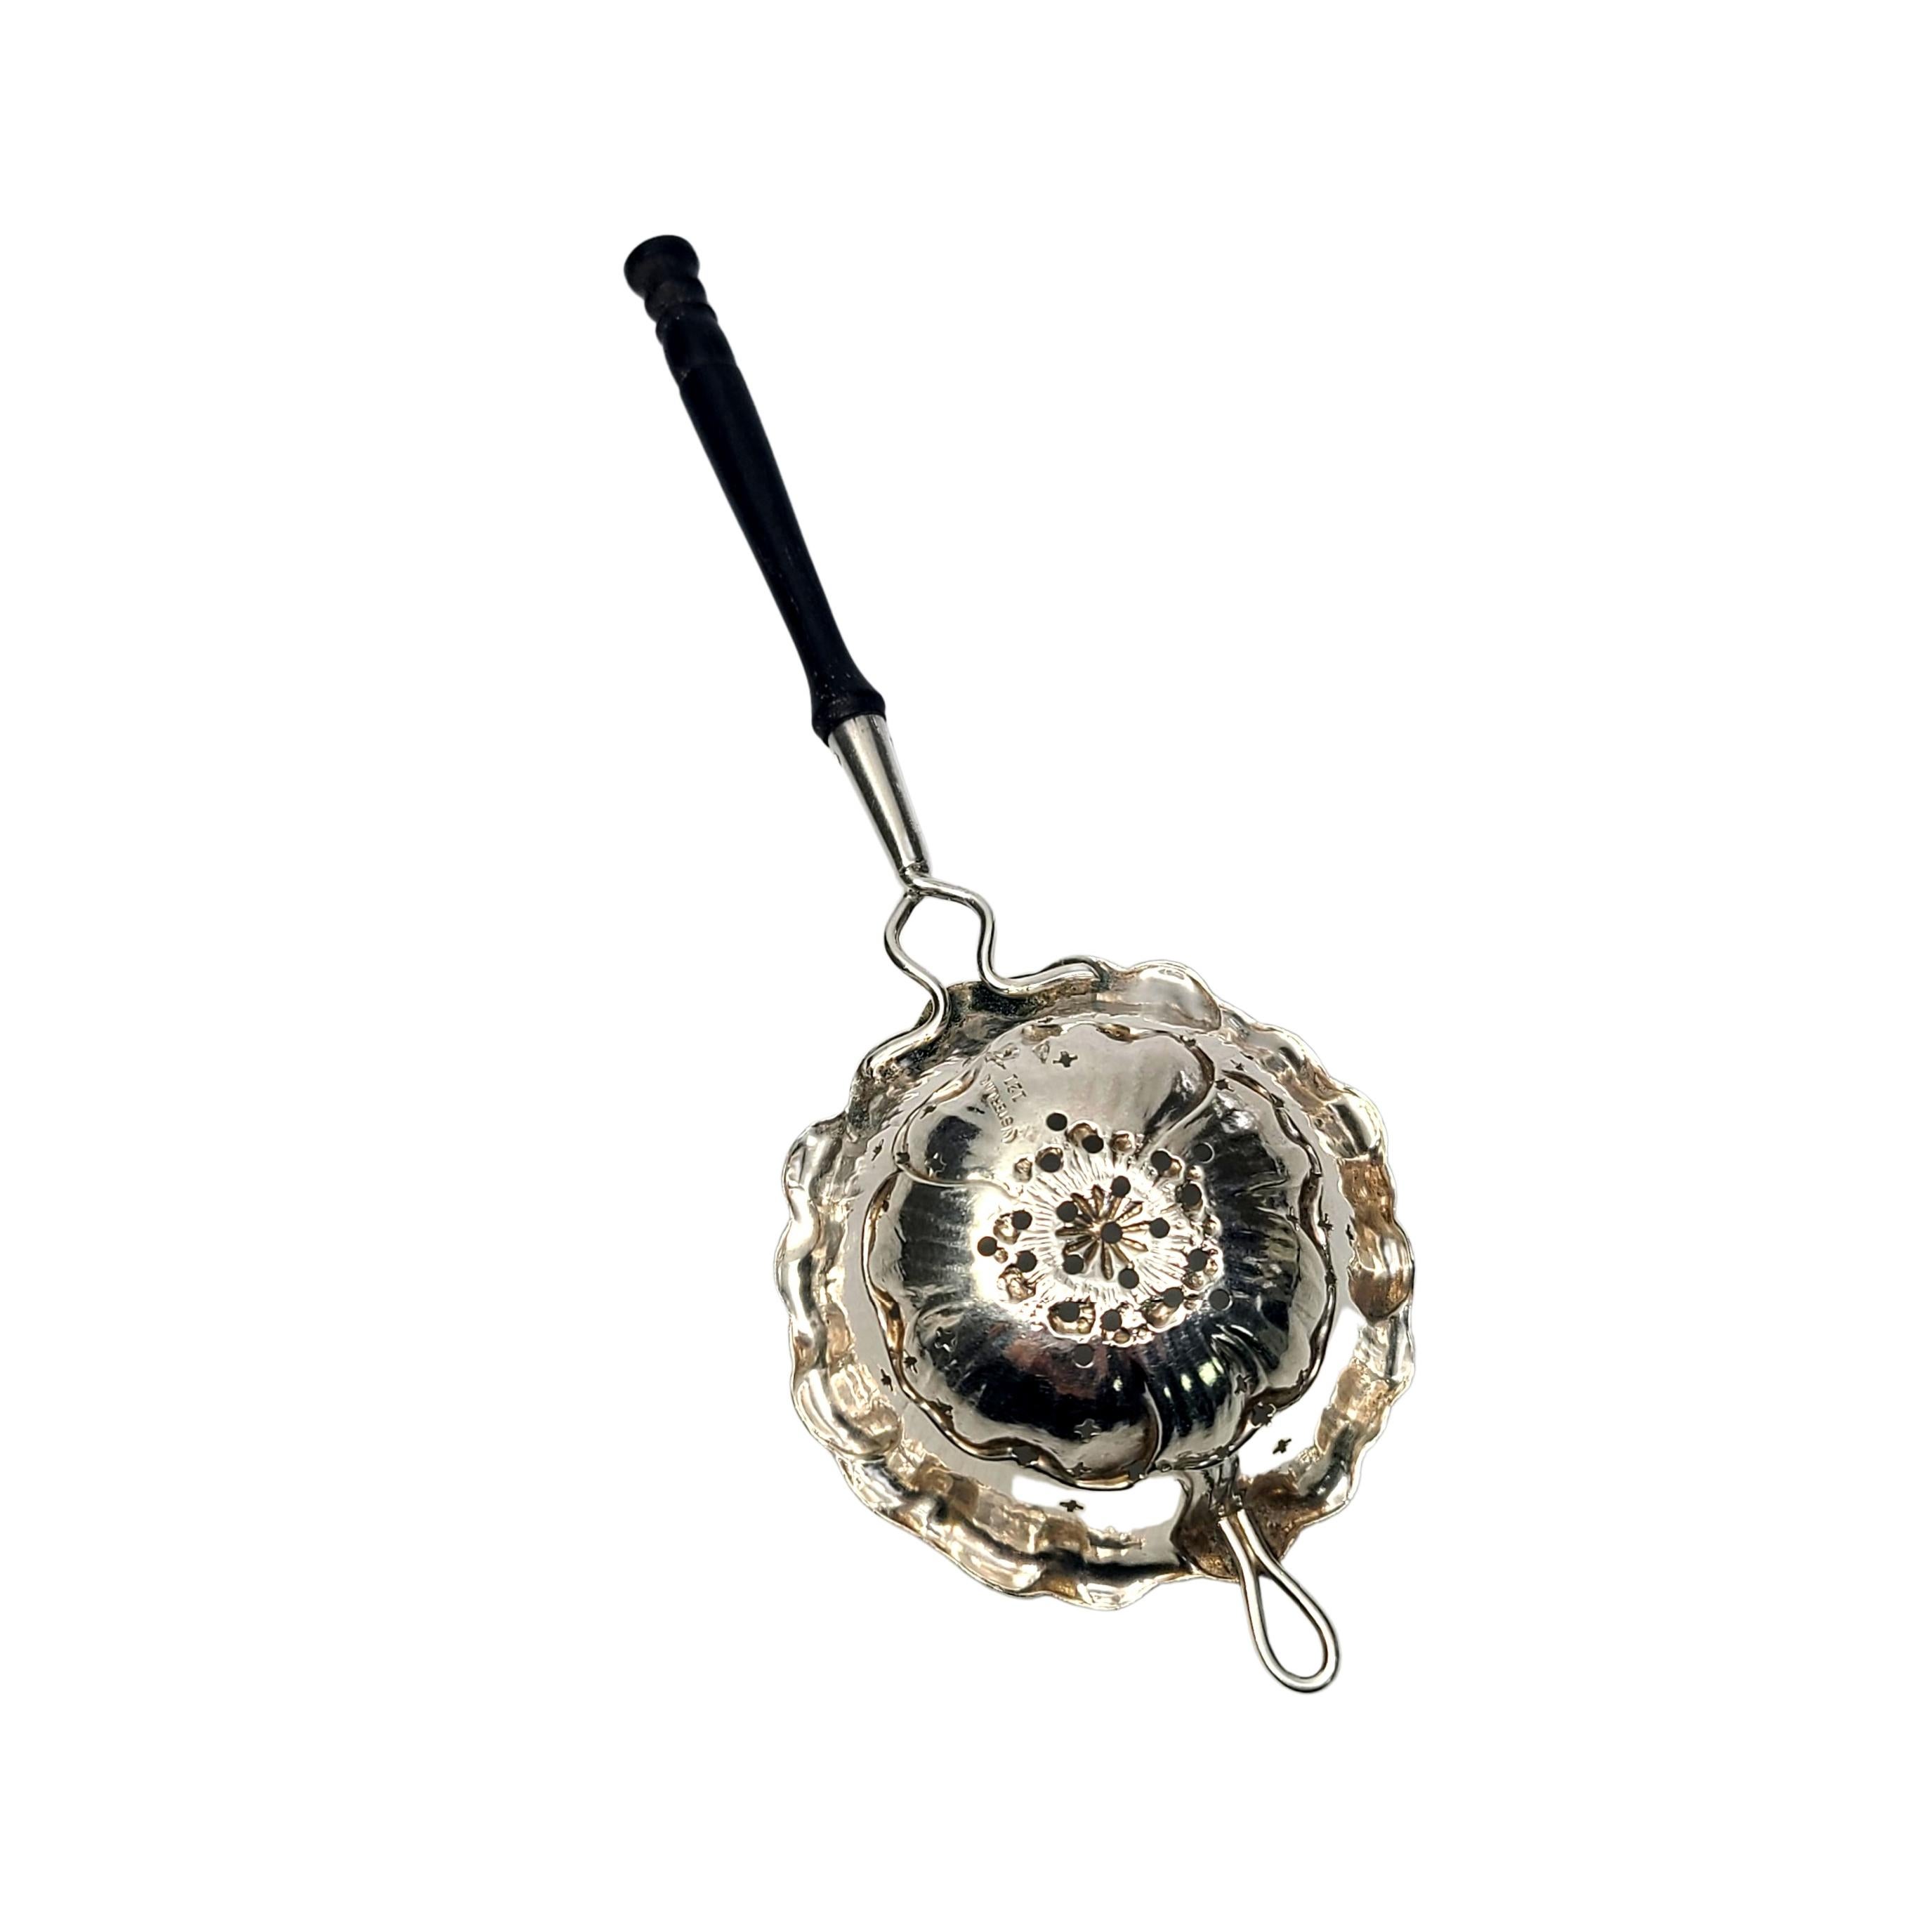 Sterling silver tea strainer by Watrous Mfg Co #121.

This tea strainer features a black handle and a pierced star design in a flower shaped bowl with crimped edges.

Measures approx 6 1/2